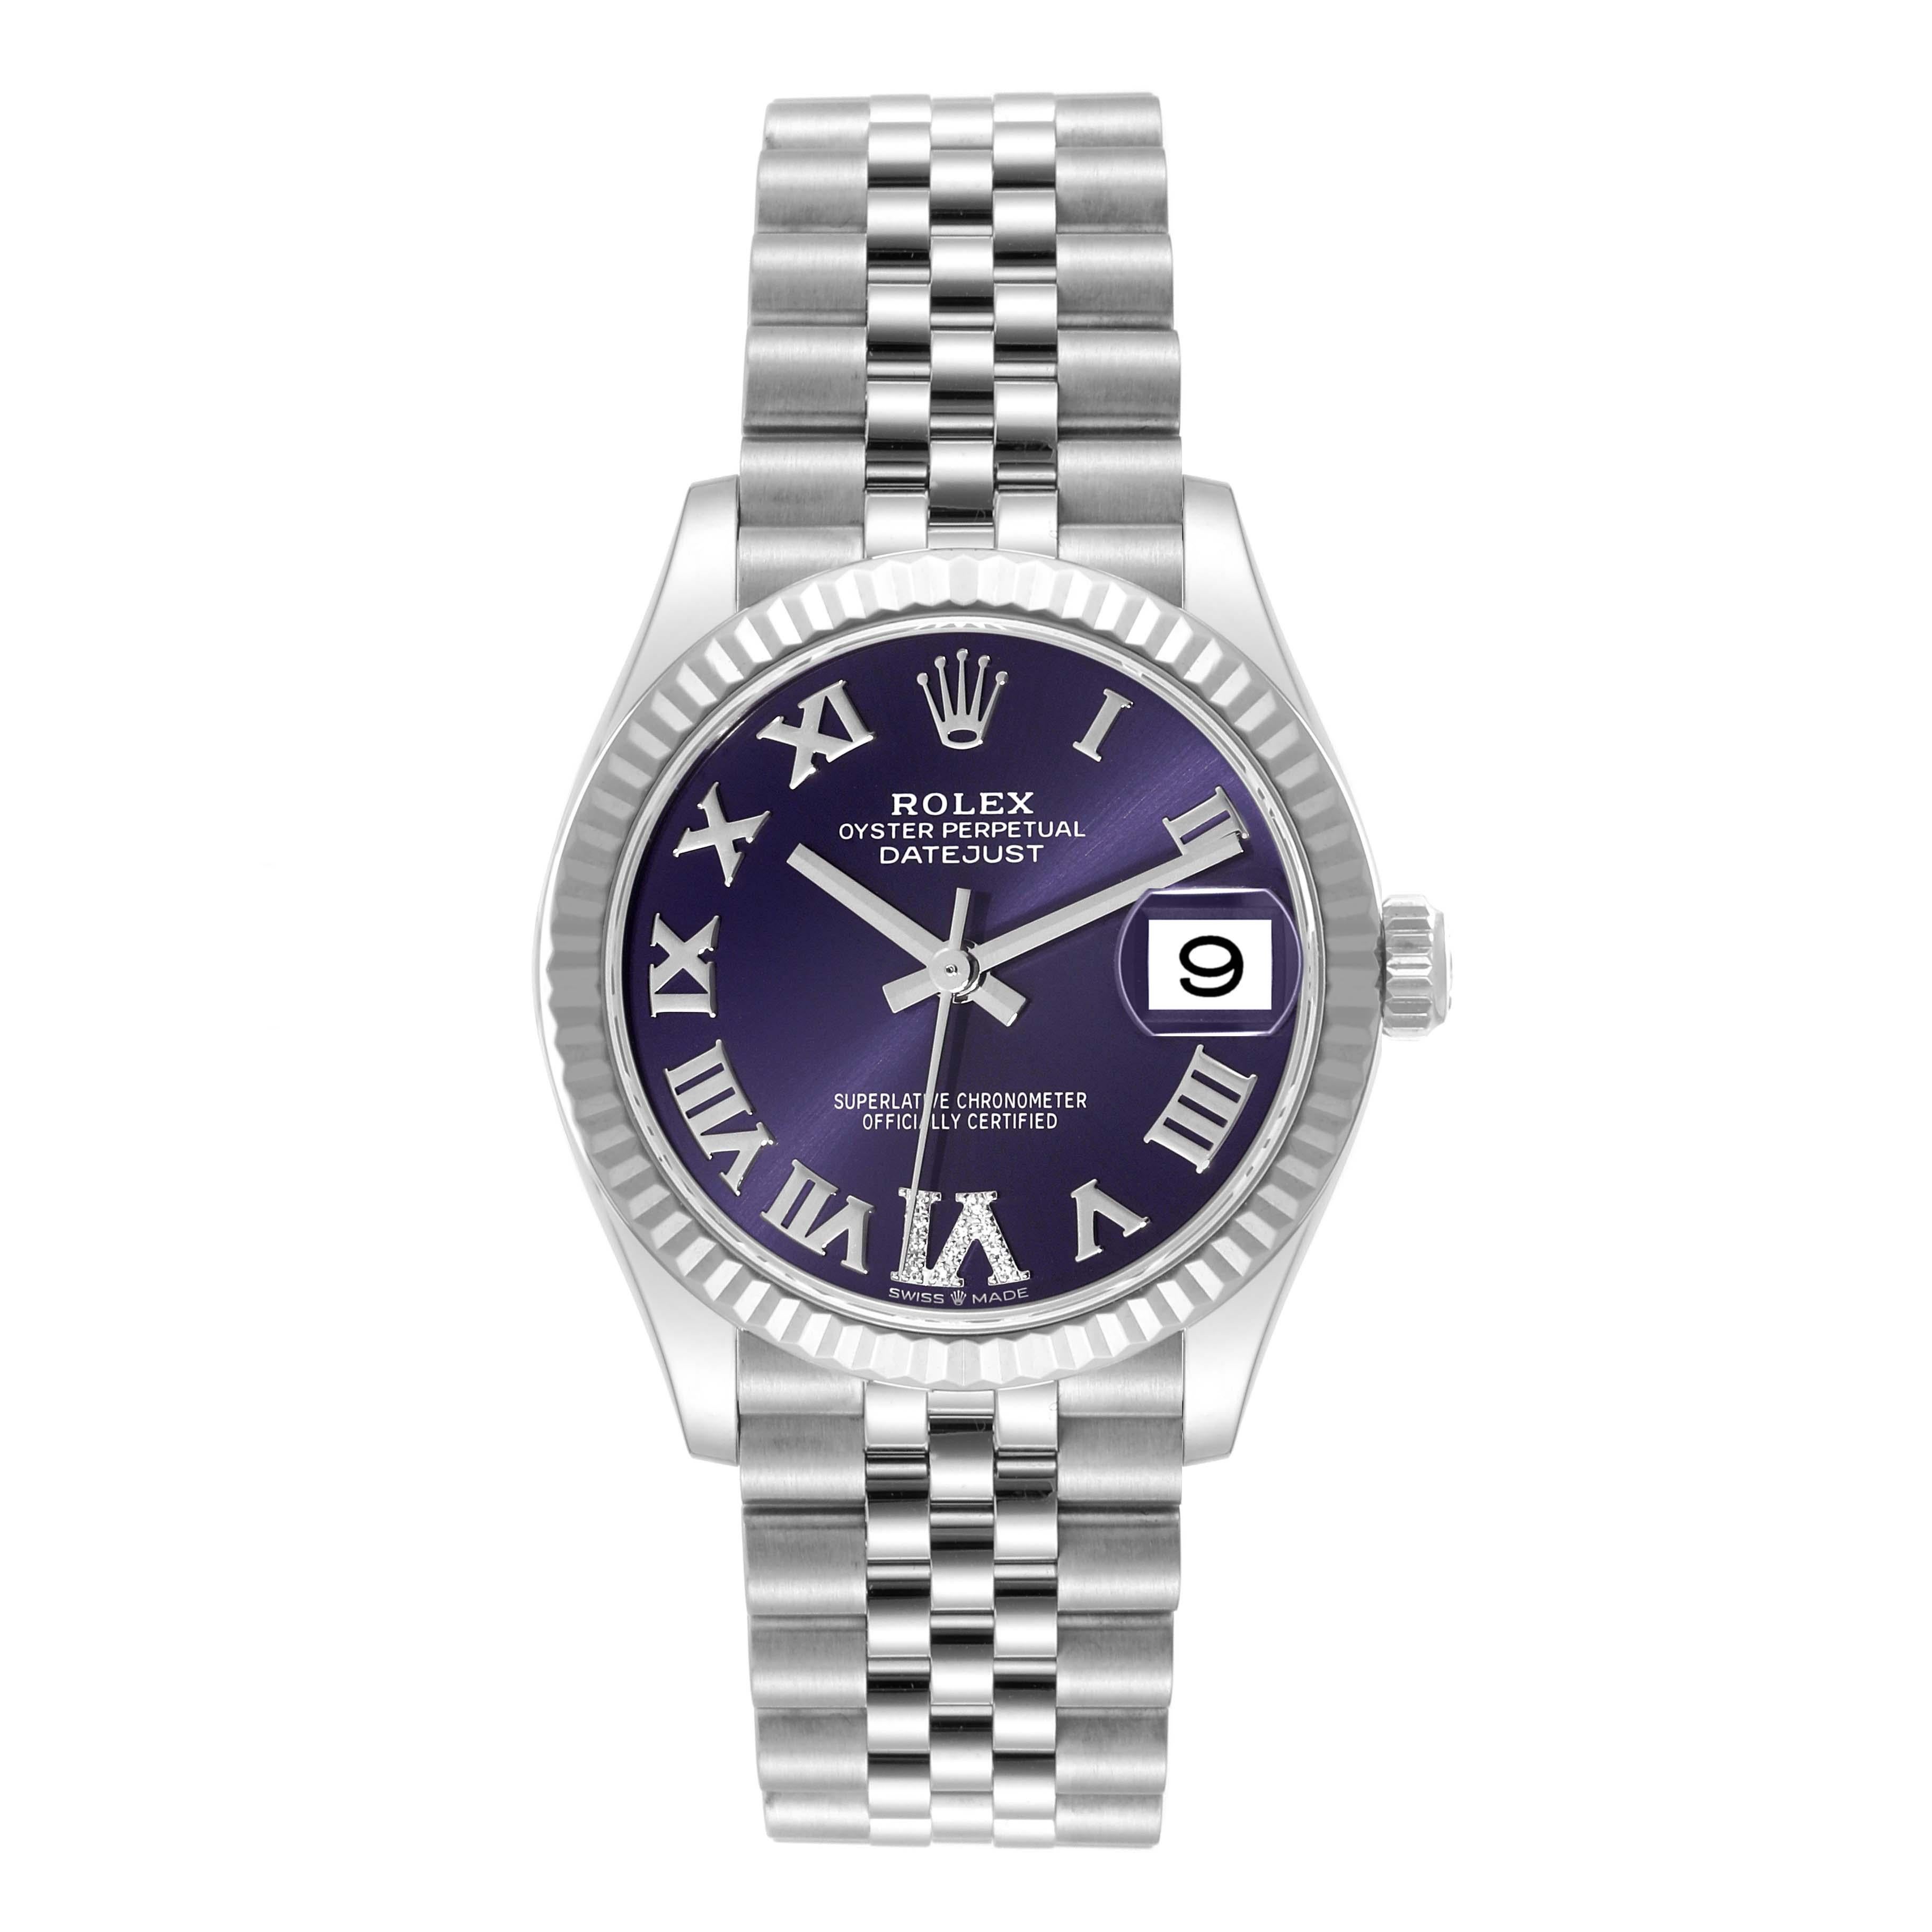 Rolex Datejust Midsize Steel White Gold Diamond Ladies Watch 278274. Officially certified chronometer automatic self-winding movement. Stainless steel oyster case 31.0 mm in diameter. Rolex logo on the crown. 18k white gold fluted bezel. Scratch